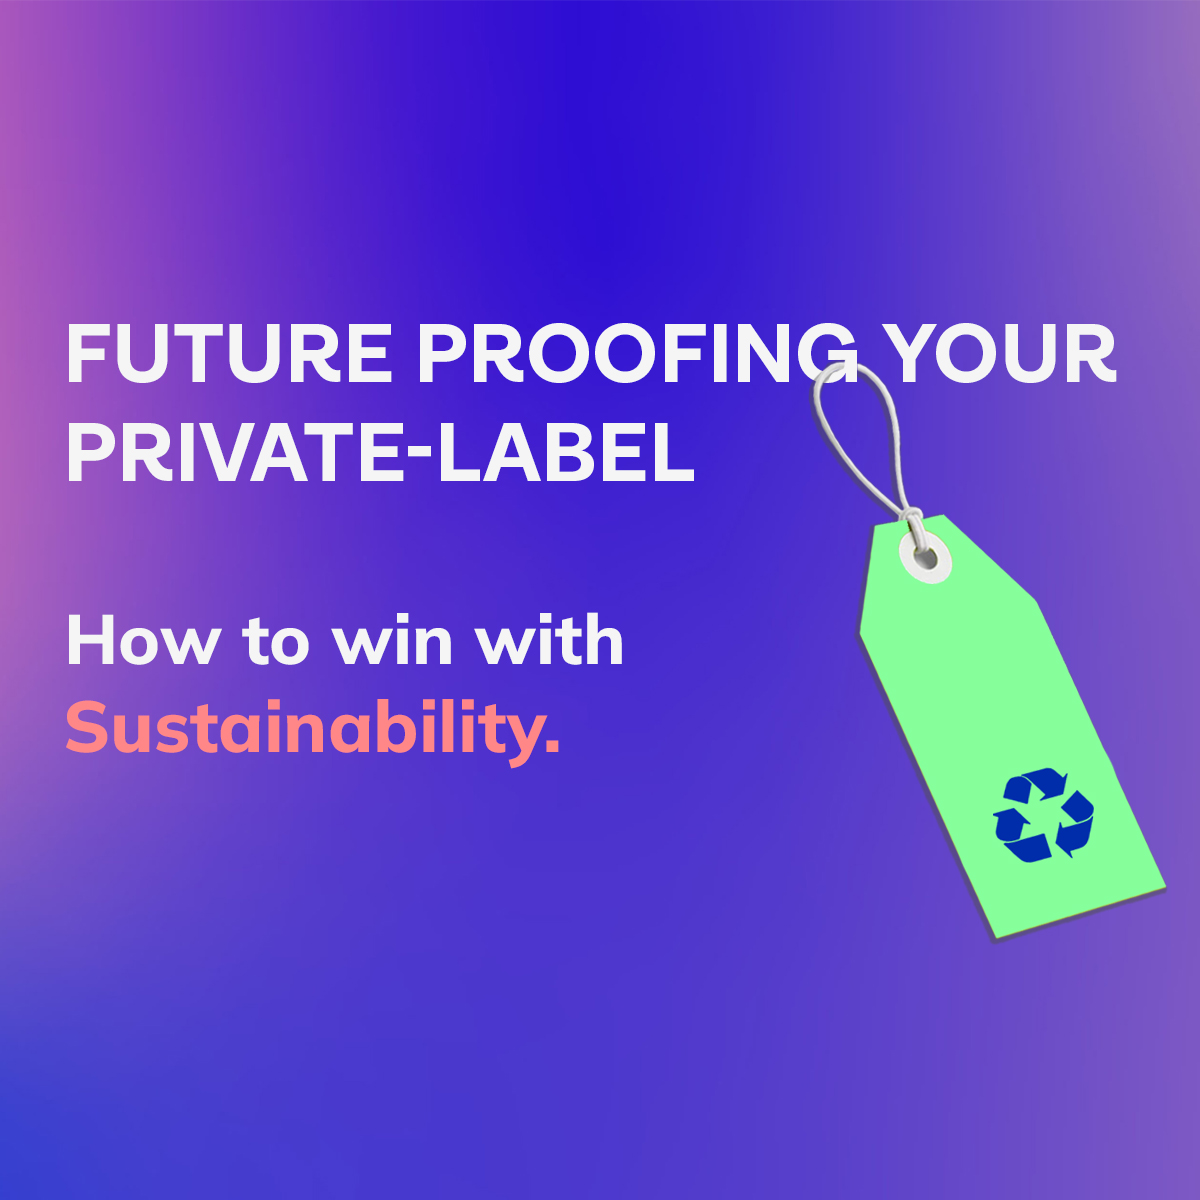 FUTURE PROOFING YOUR PRIVATE-LABEL: How to win Sustainability.